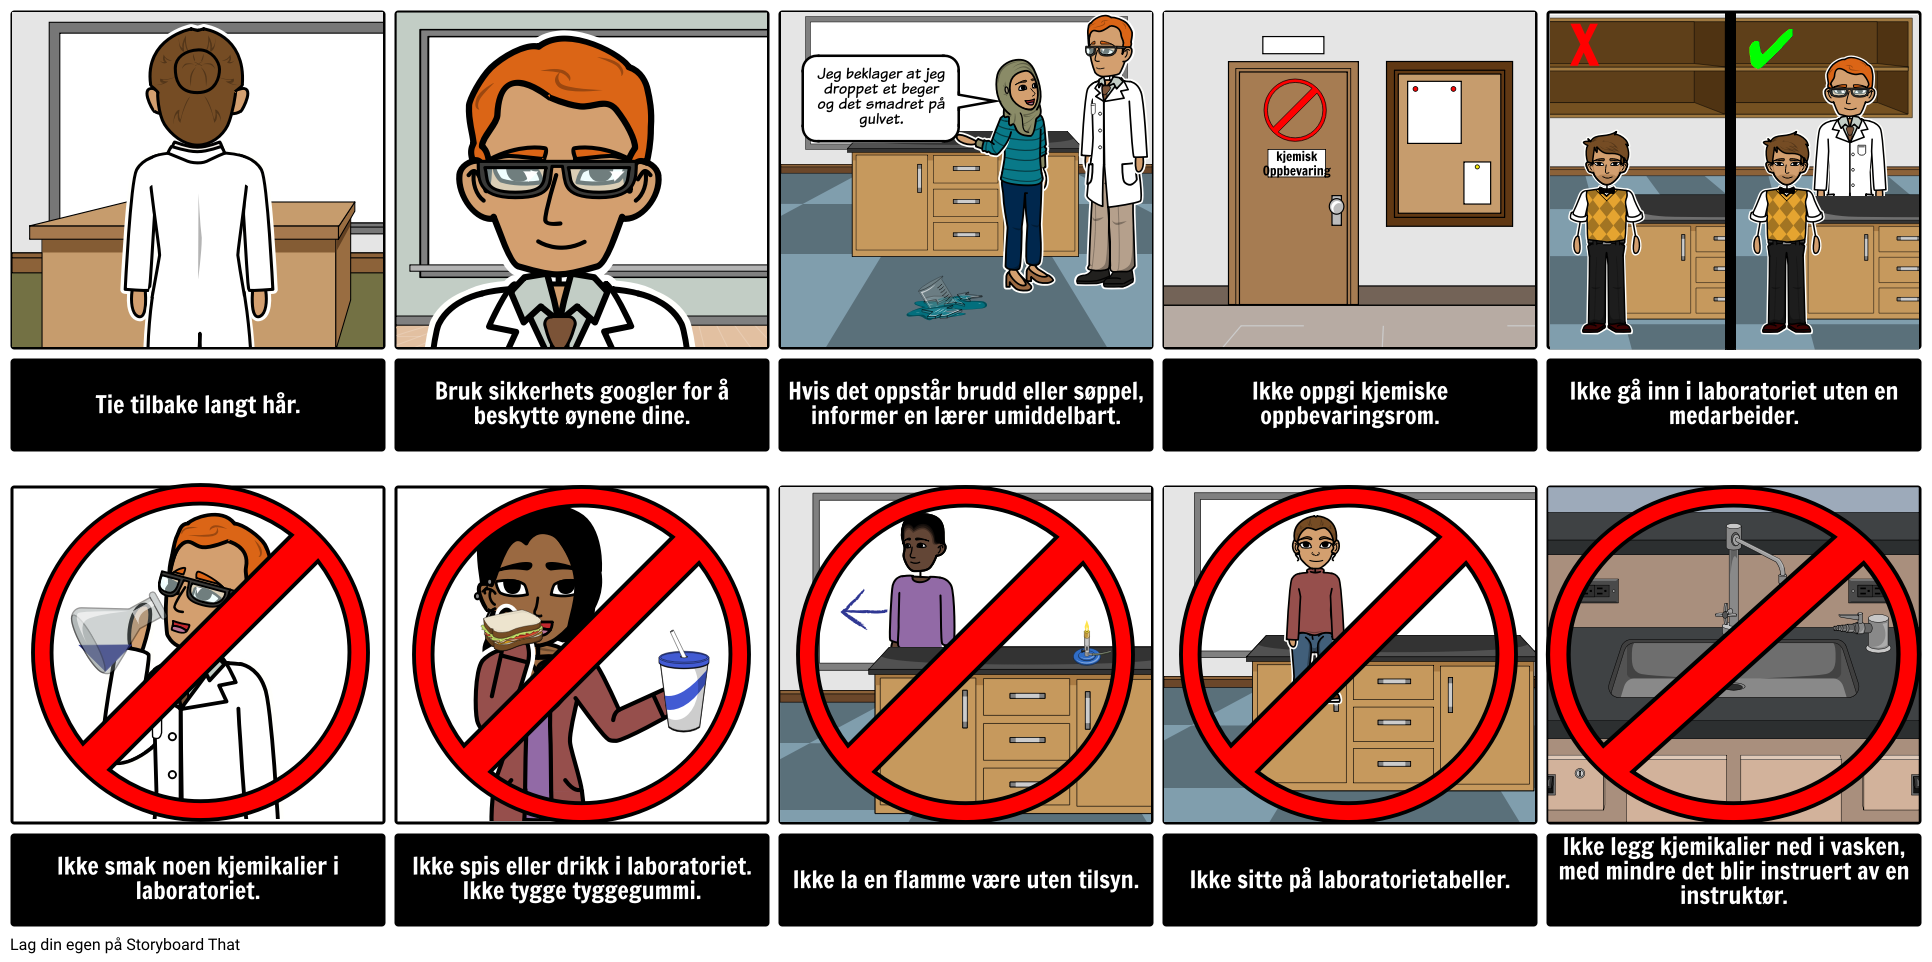 Lab Safety Rules